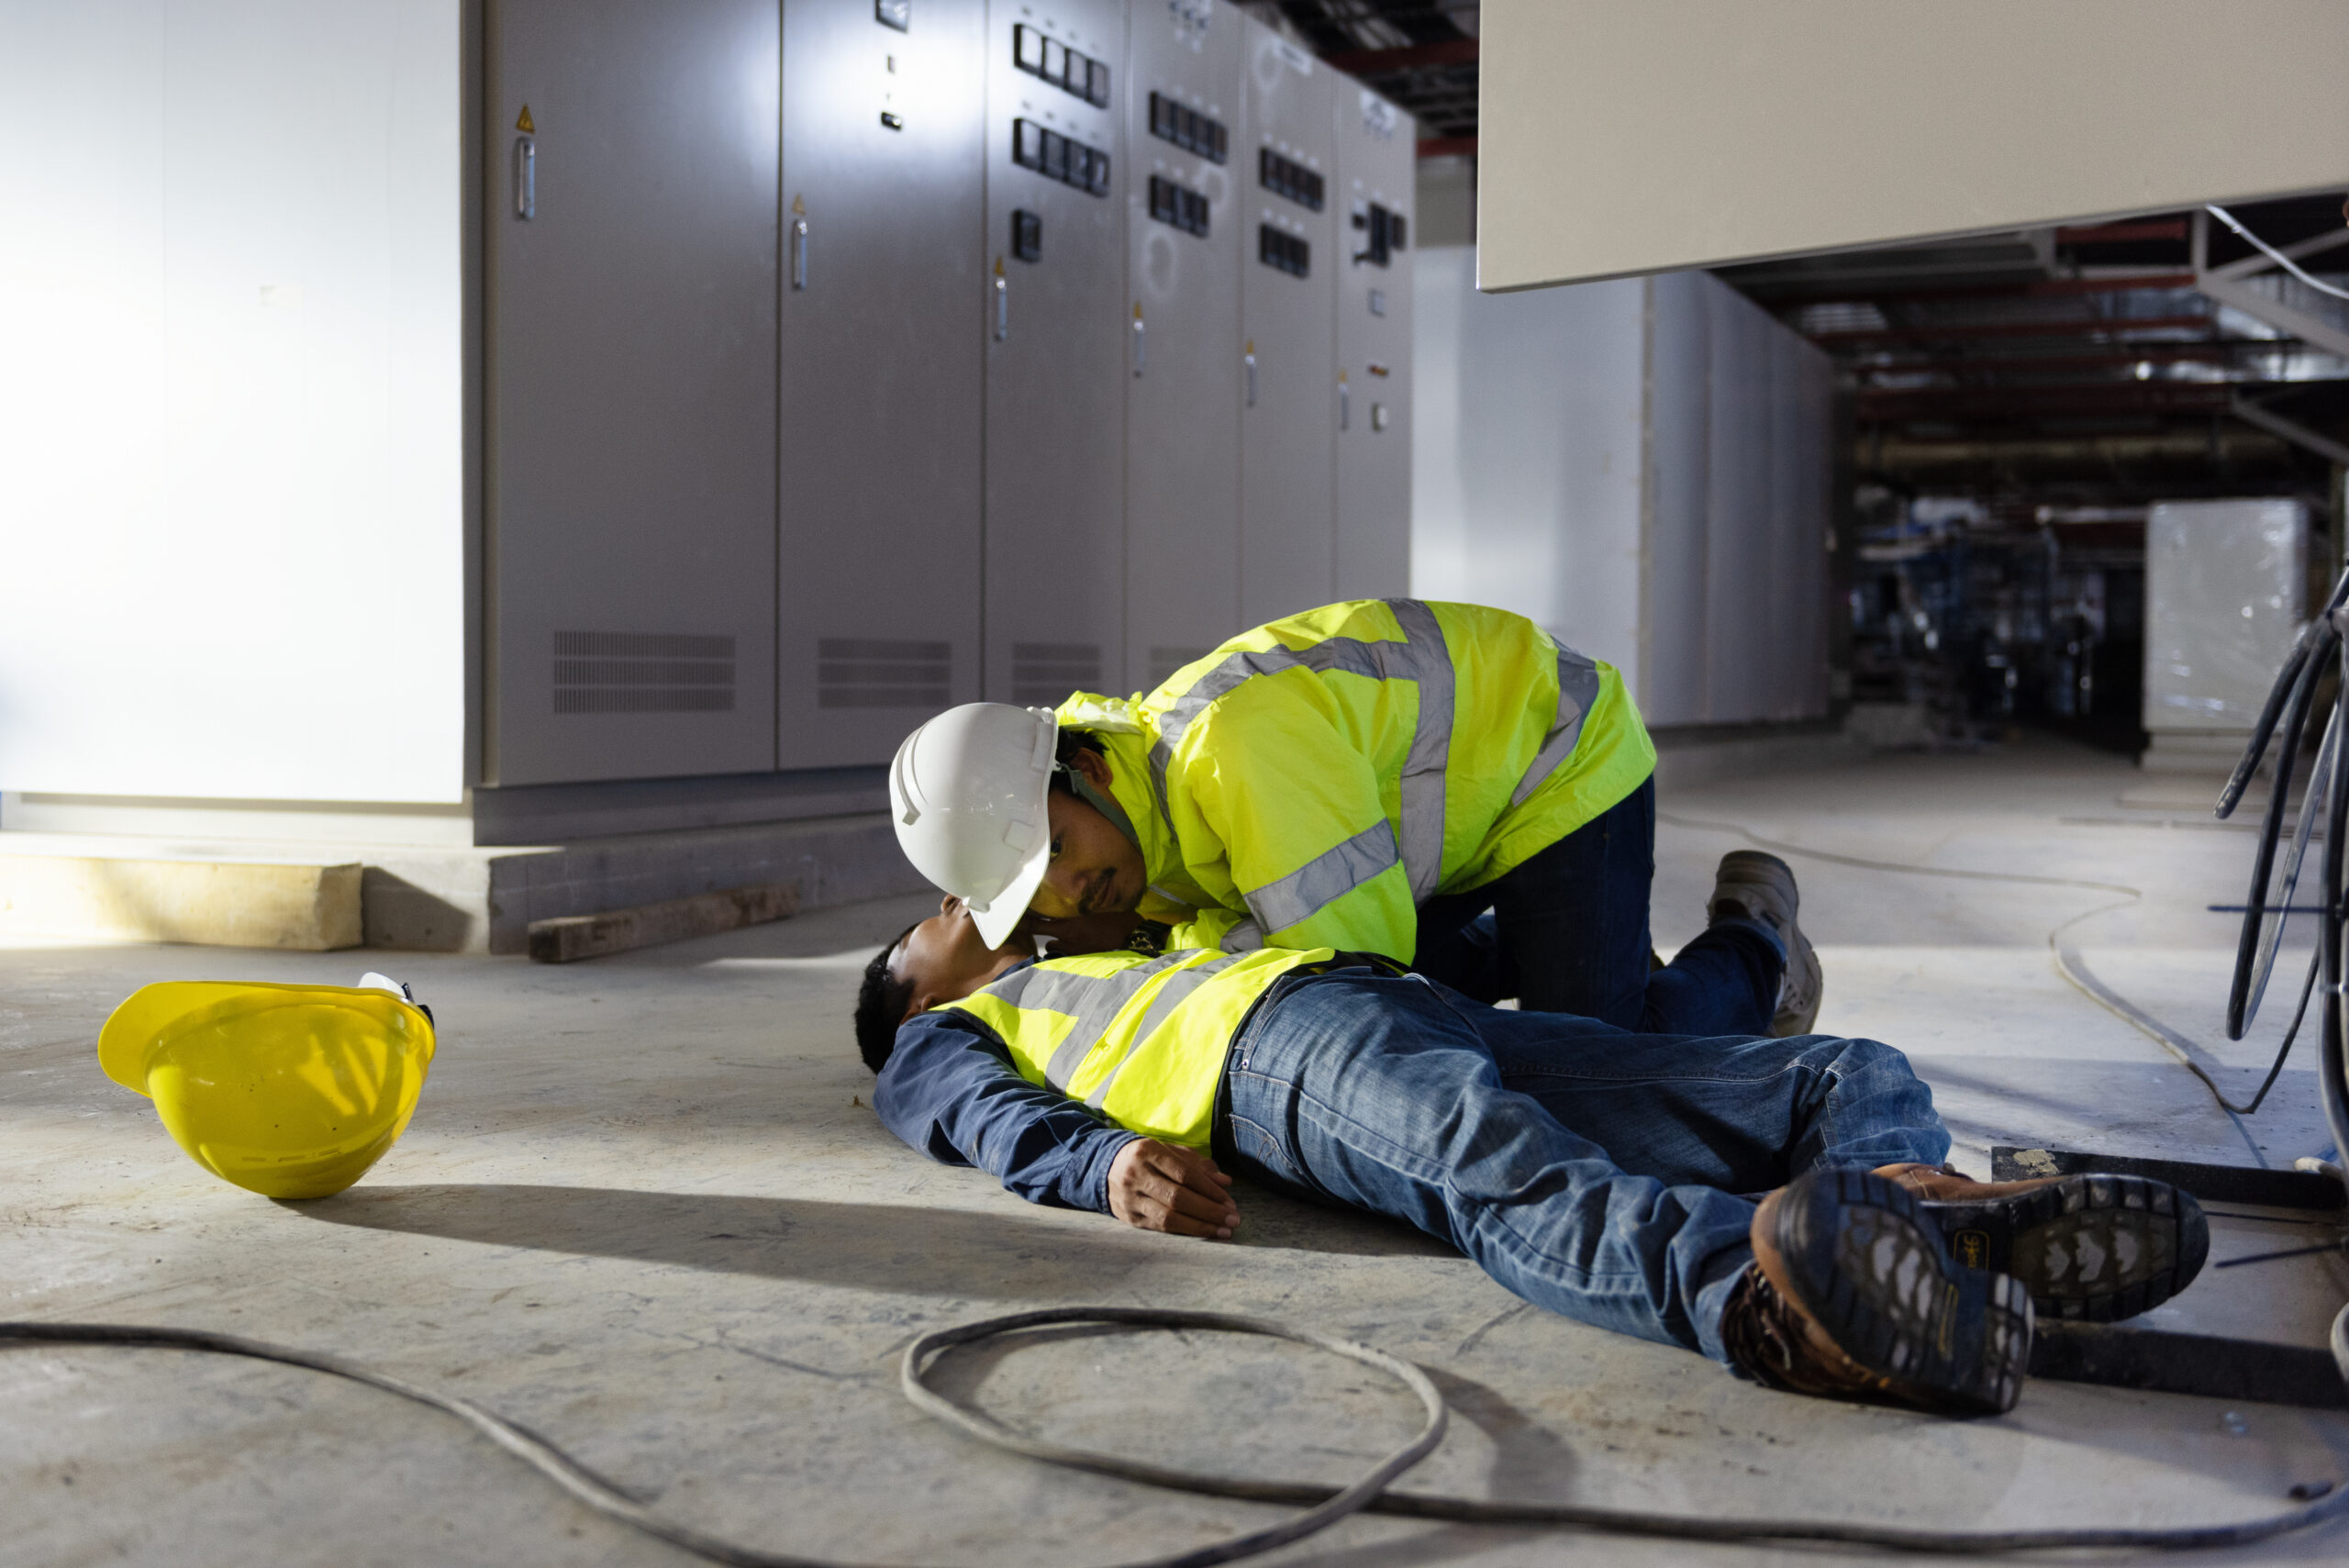 Man in hardhat checking to see if coworker lying on the ground is breathing. Wrongful death concept.